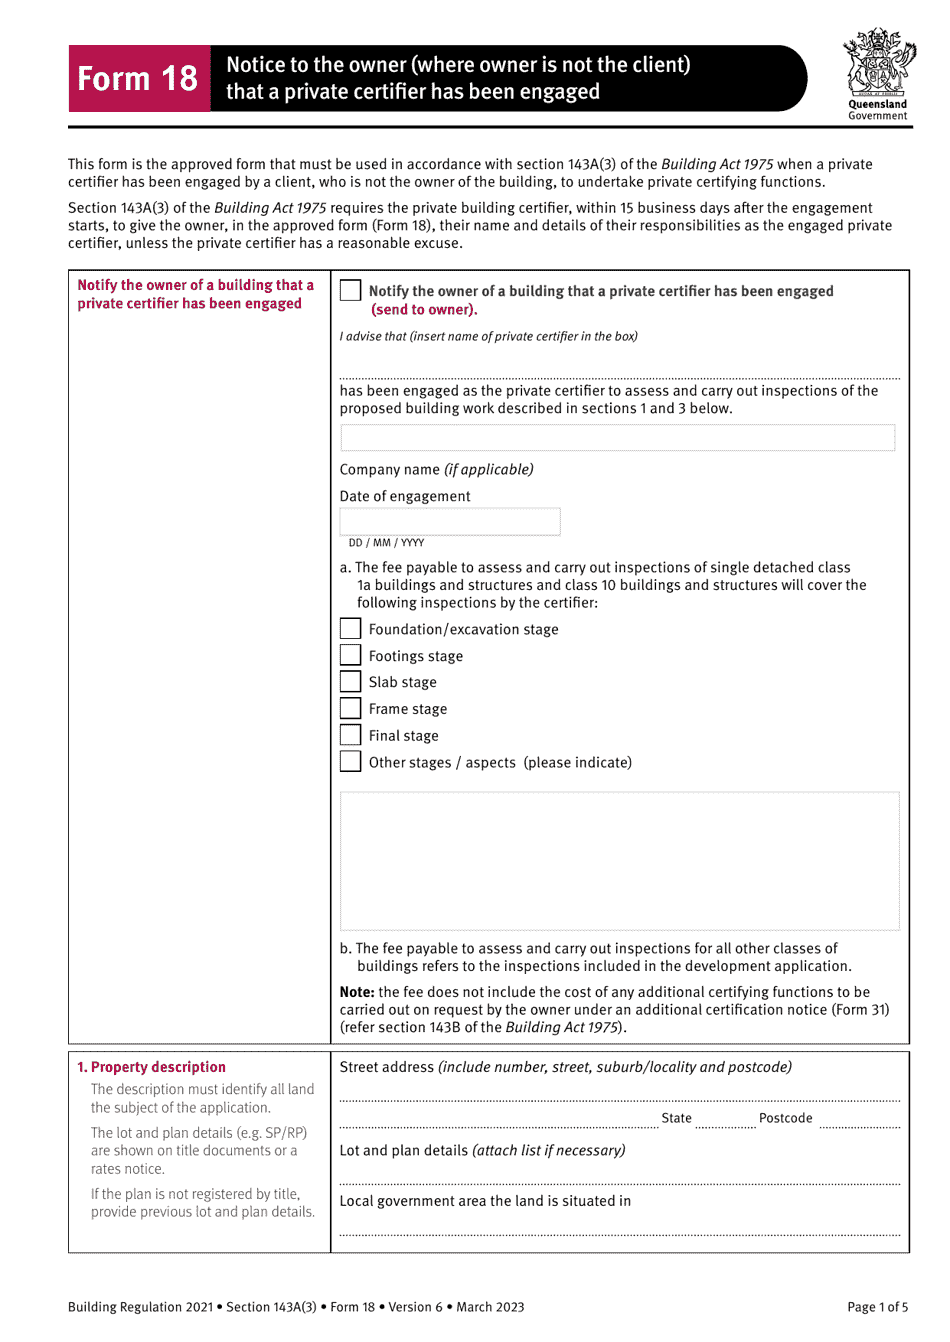 Form 18 Notice to the Owner (Where Owner Is Not the Client) That a Private Certifier Has Been Engaged - Queensland, Australia, Page 1